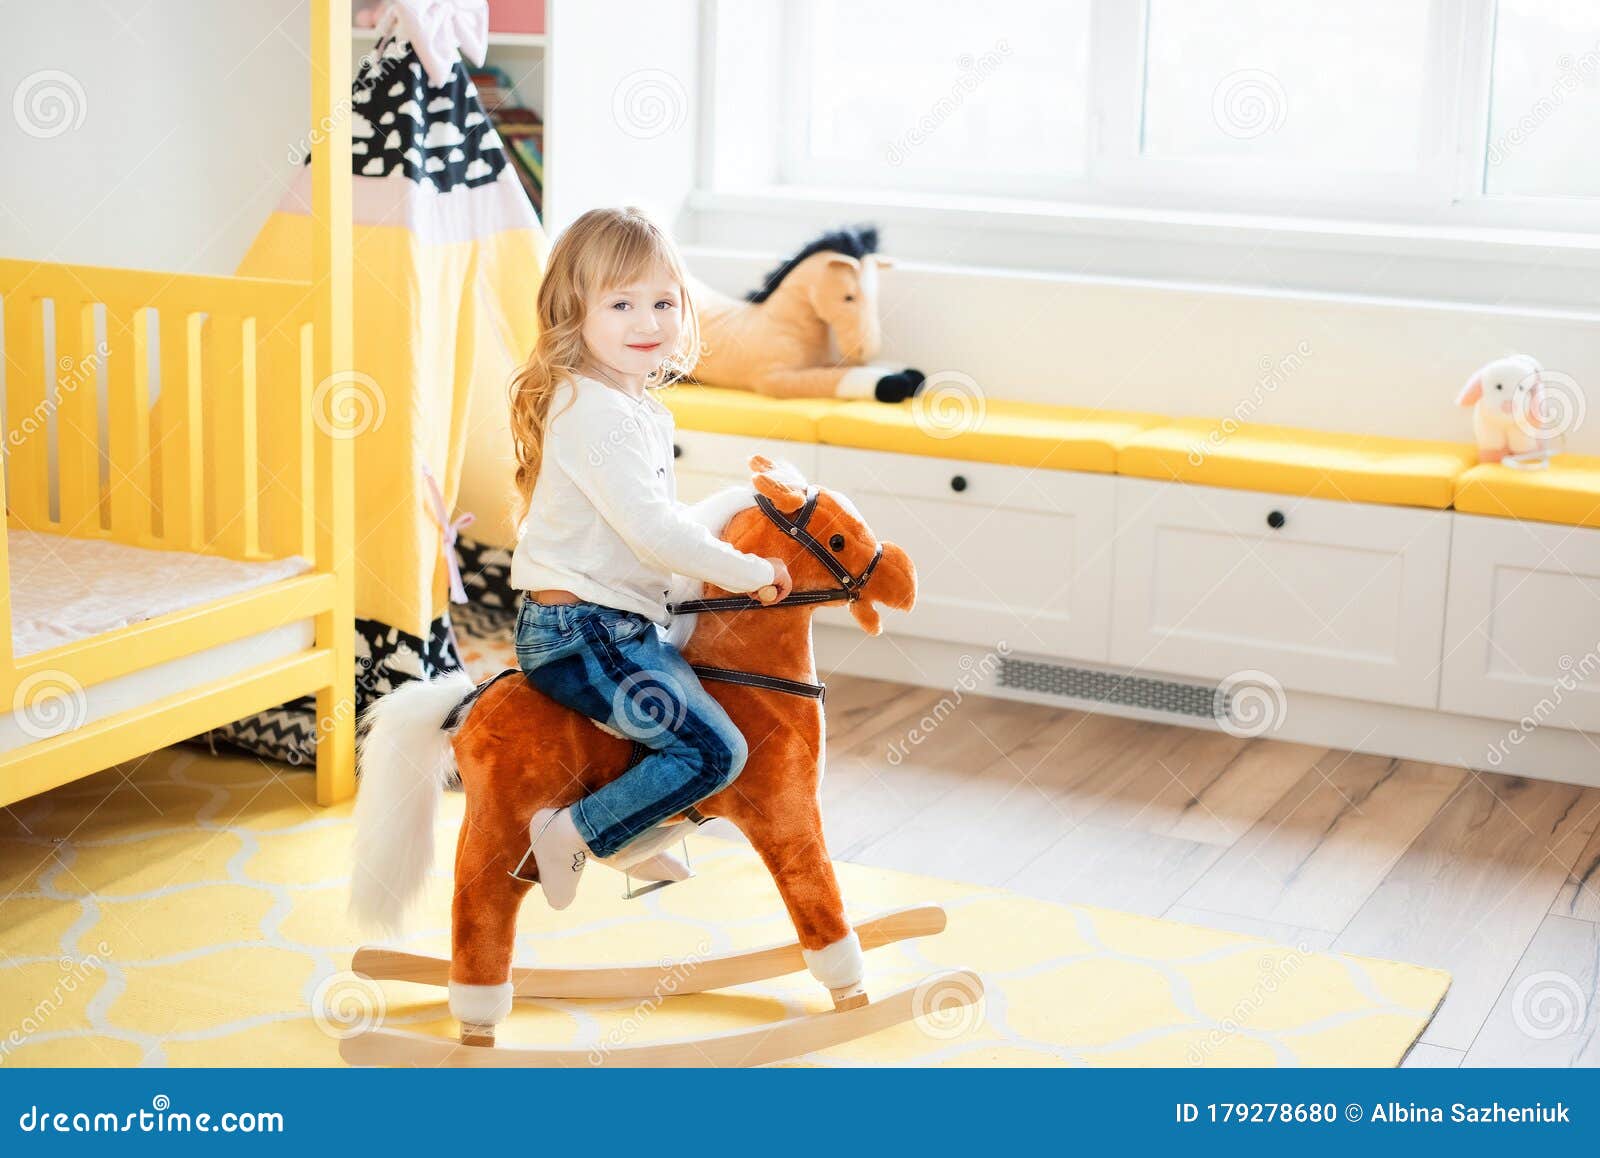 little smiling blonde 3 years old girl sitting on rocking horse in yellow bedroom at home in day time. time to play during self